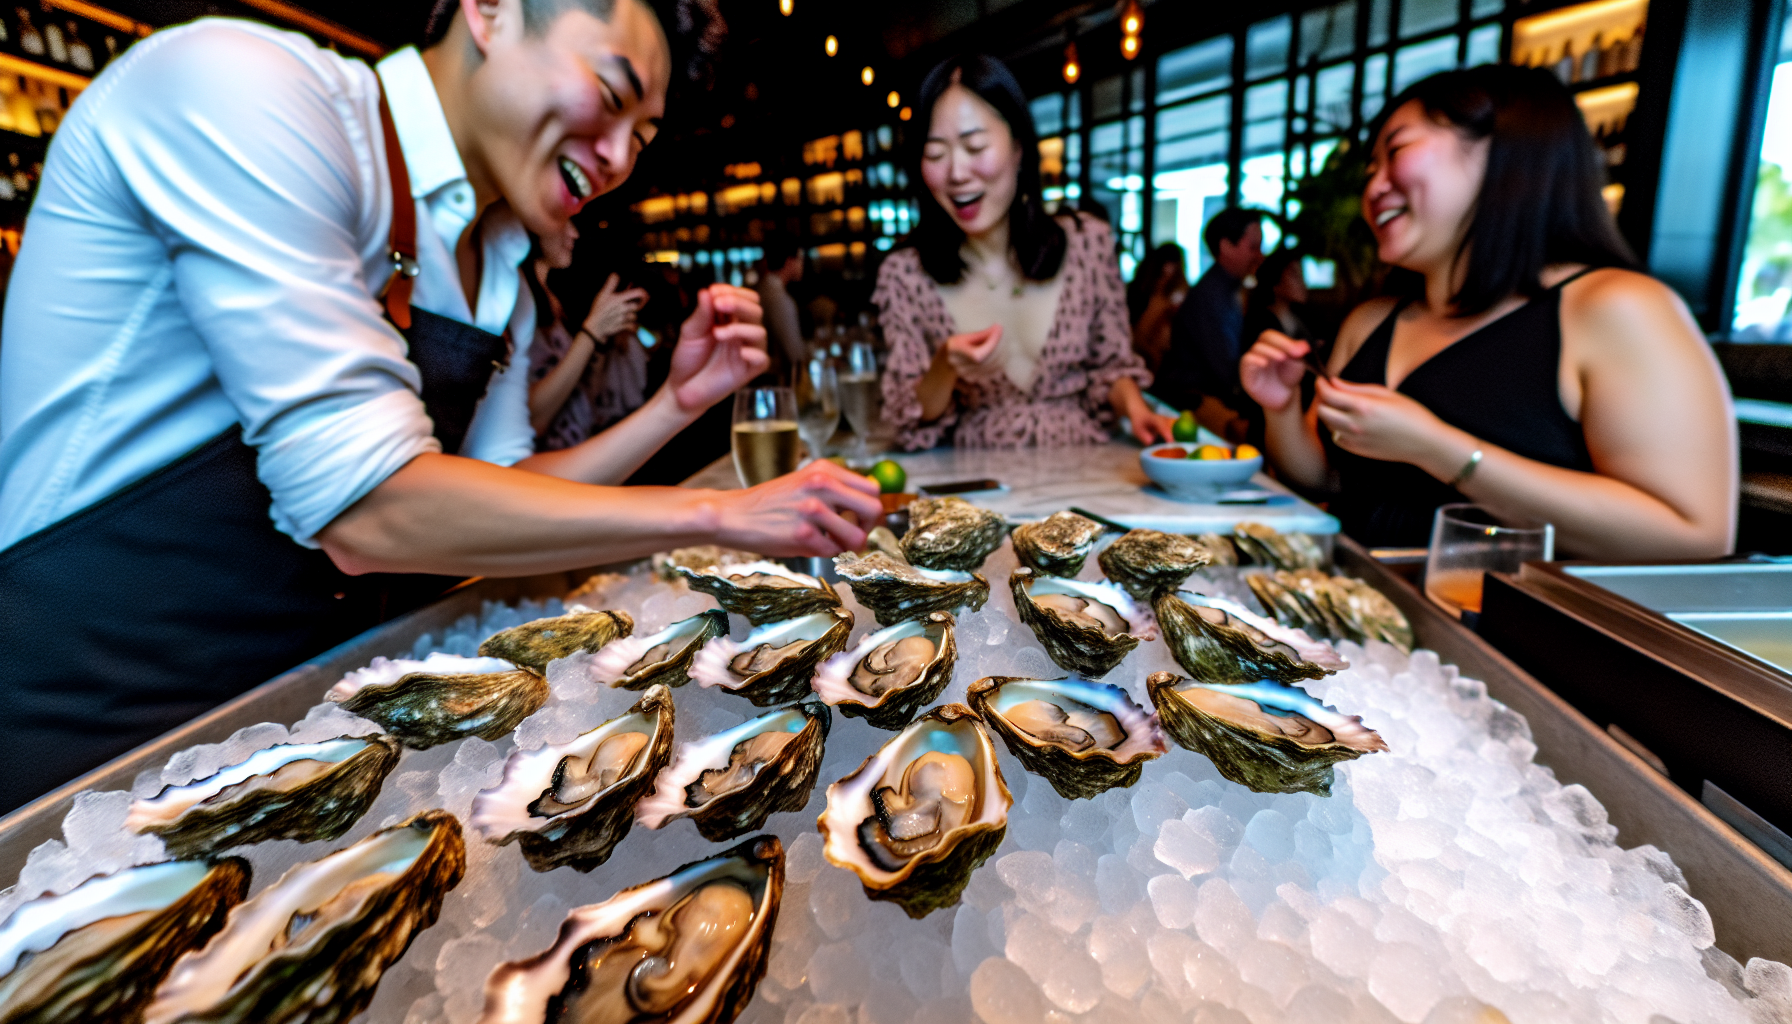 A display of fresh oysters on ice at a bustling oyster bar in Fort Lauderdale